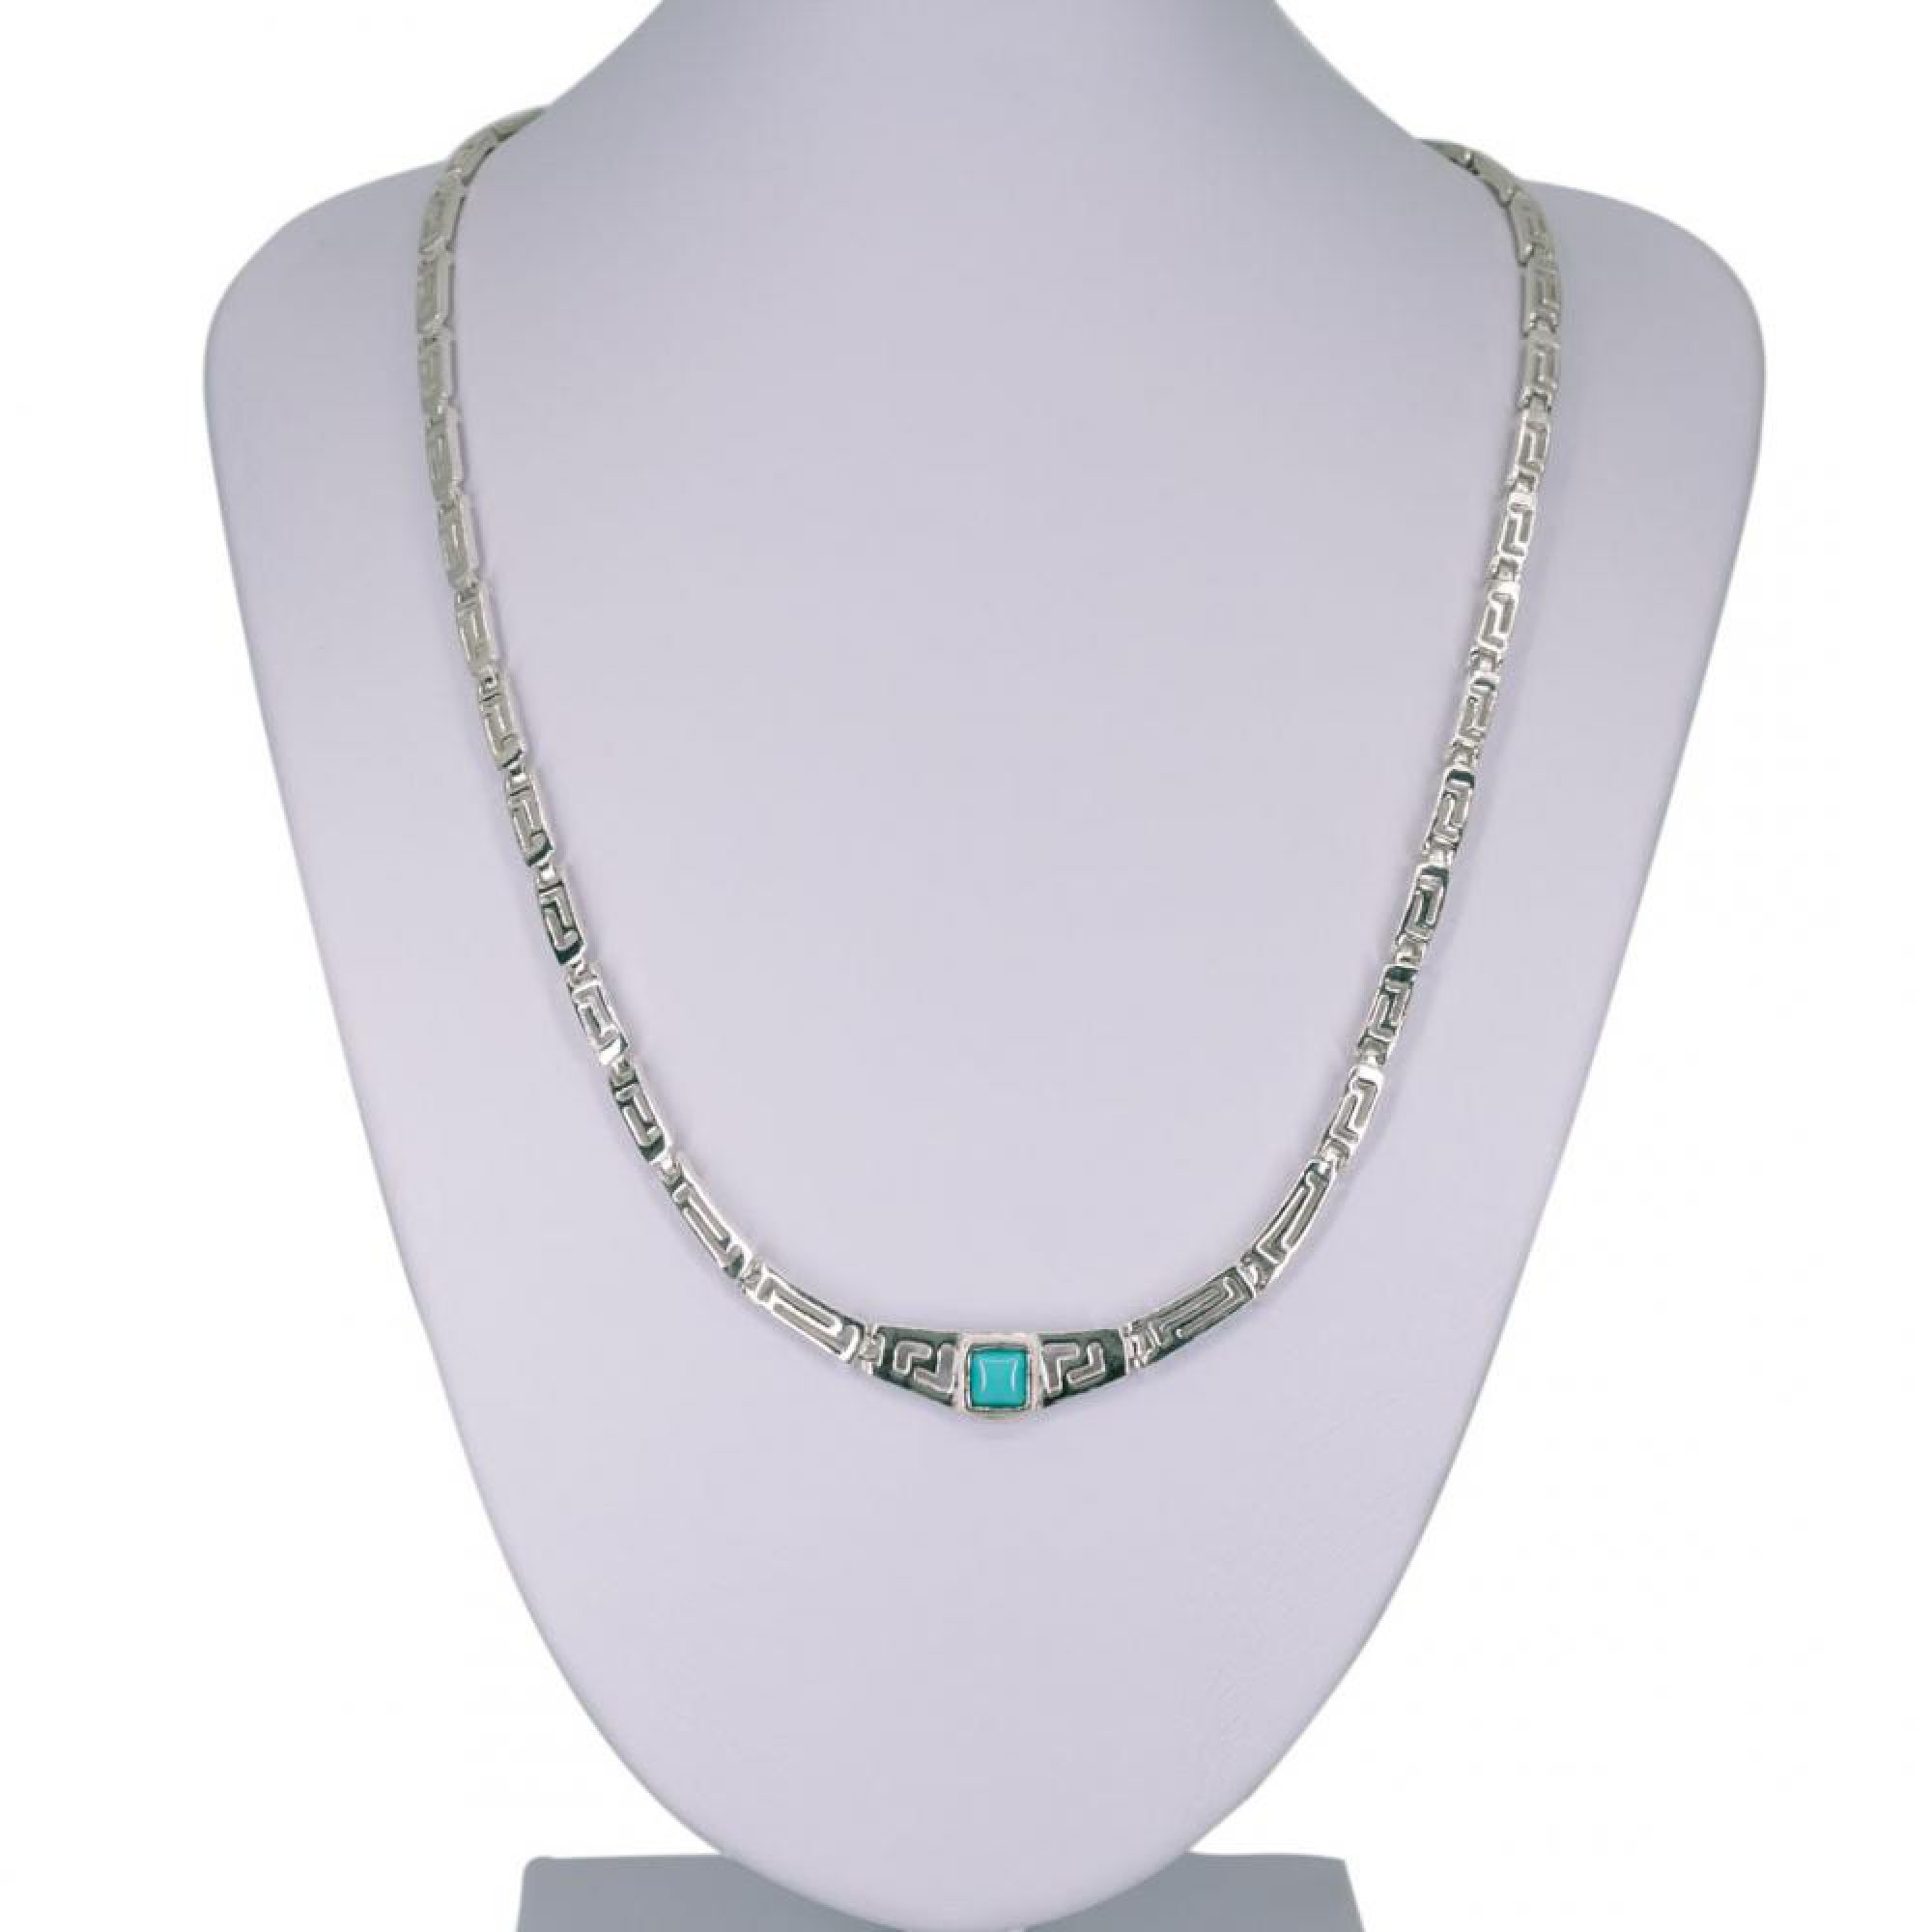 Meander necklace with turquoise stone